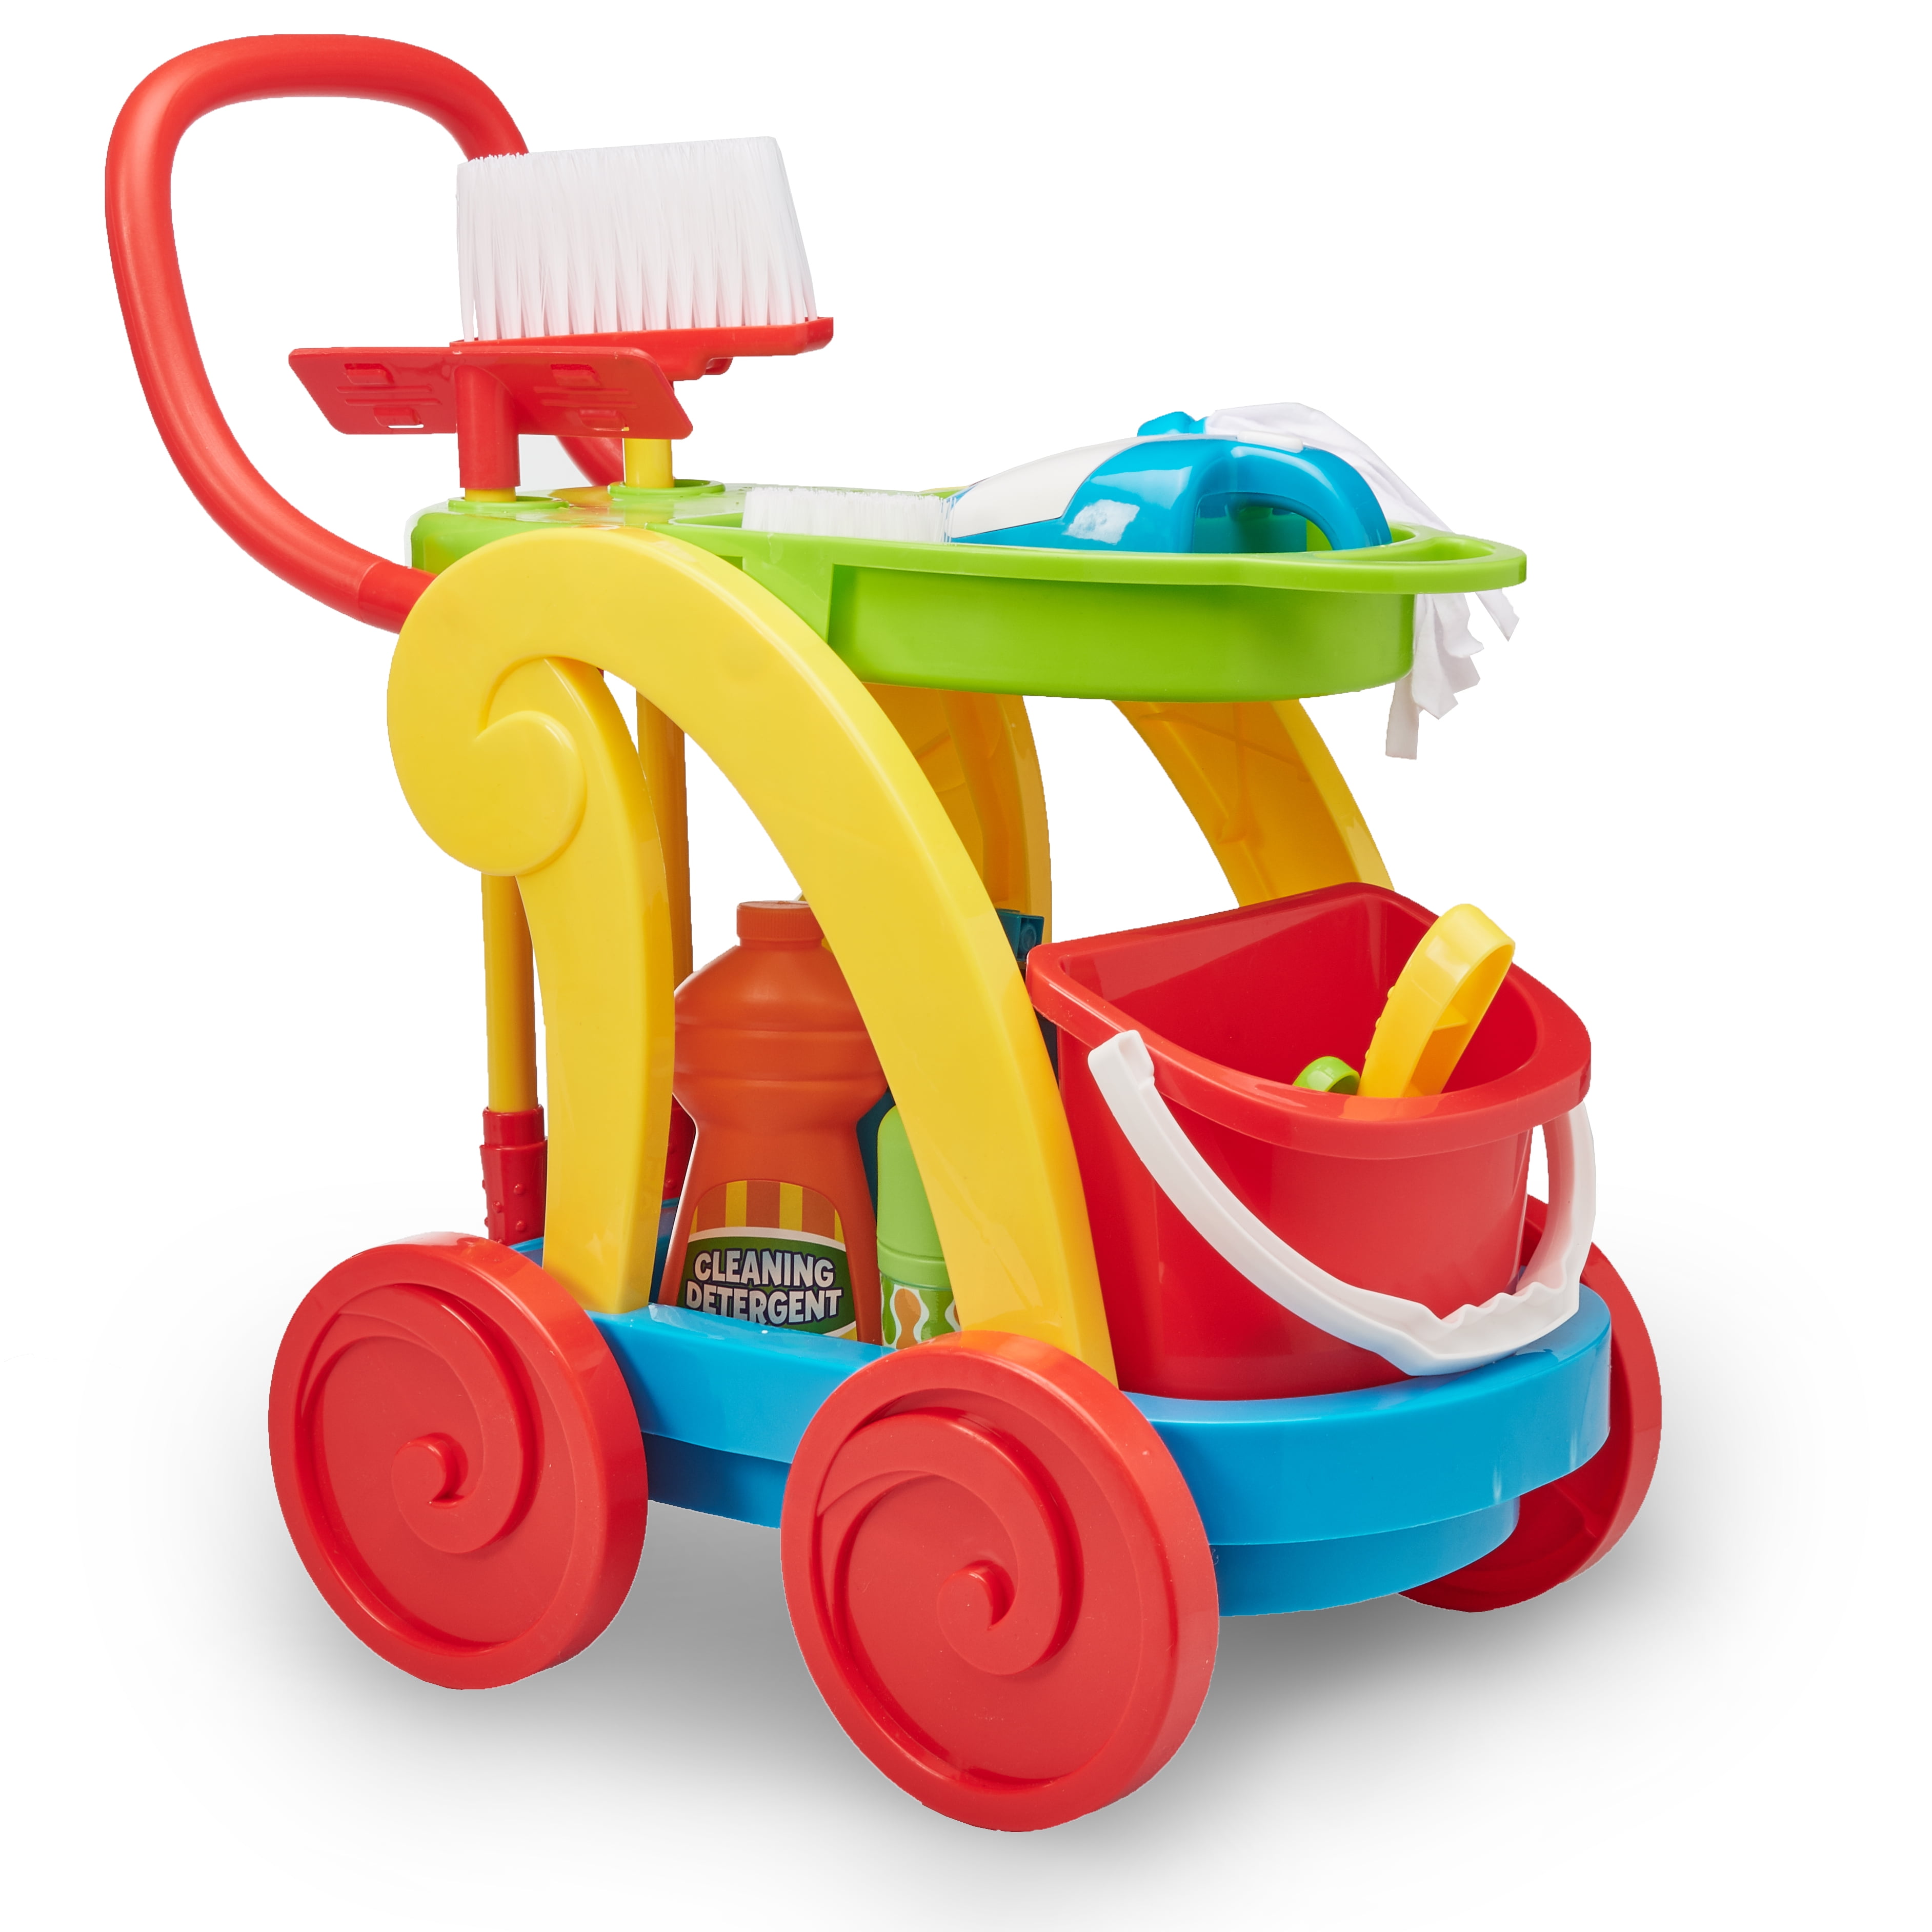 Kid connection cleaning cart play set 